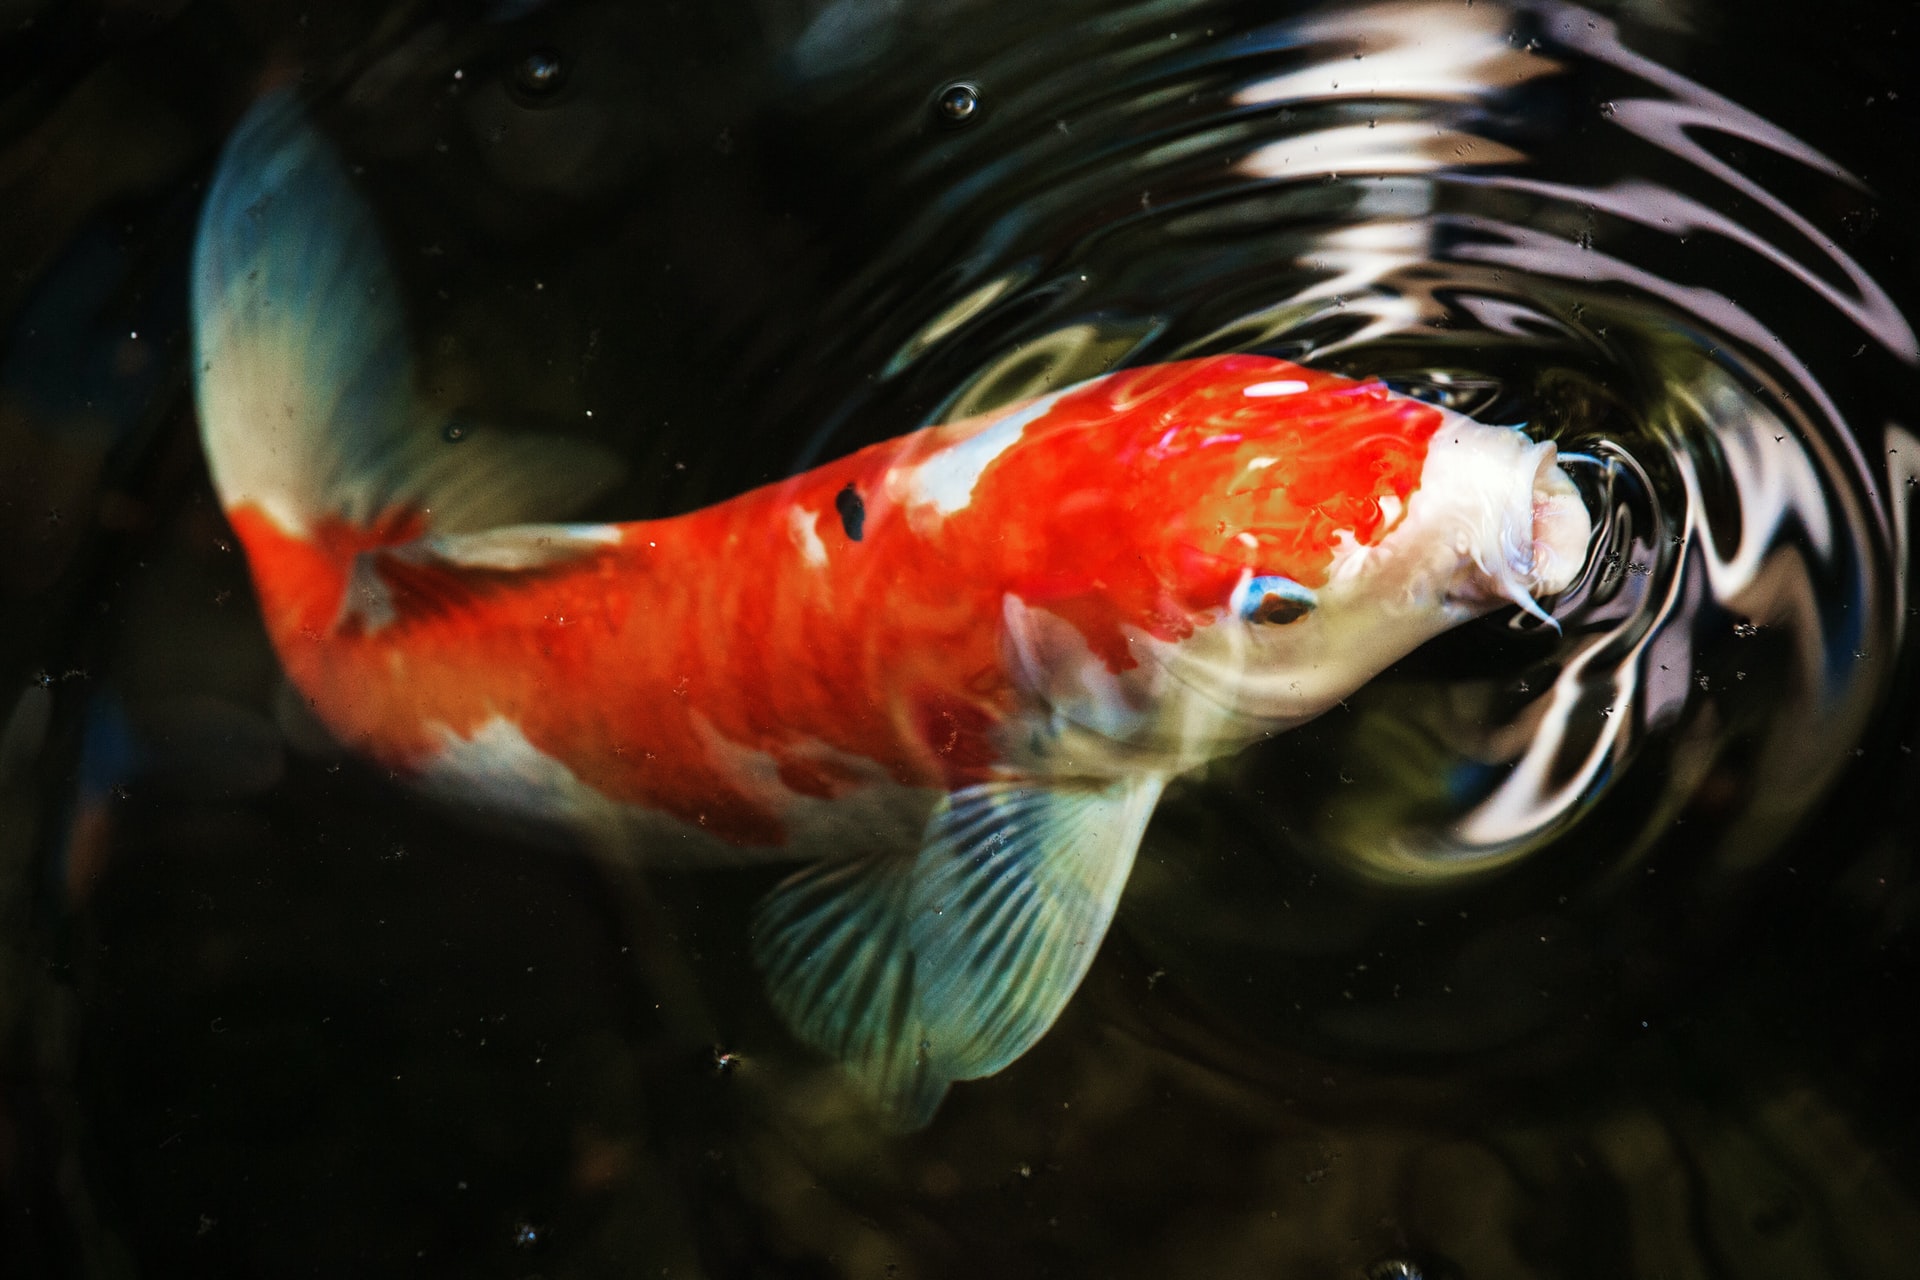 Kohaku koi fish is eating its food in a pond. The koi is predomnantly red with white markings on its fins.